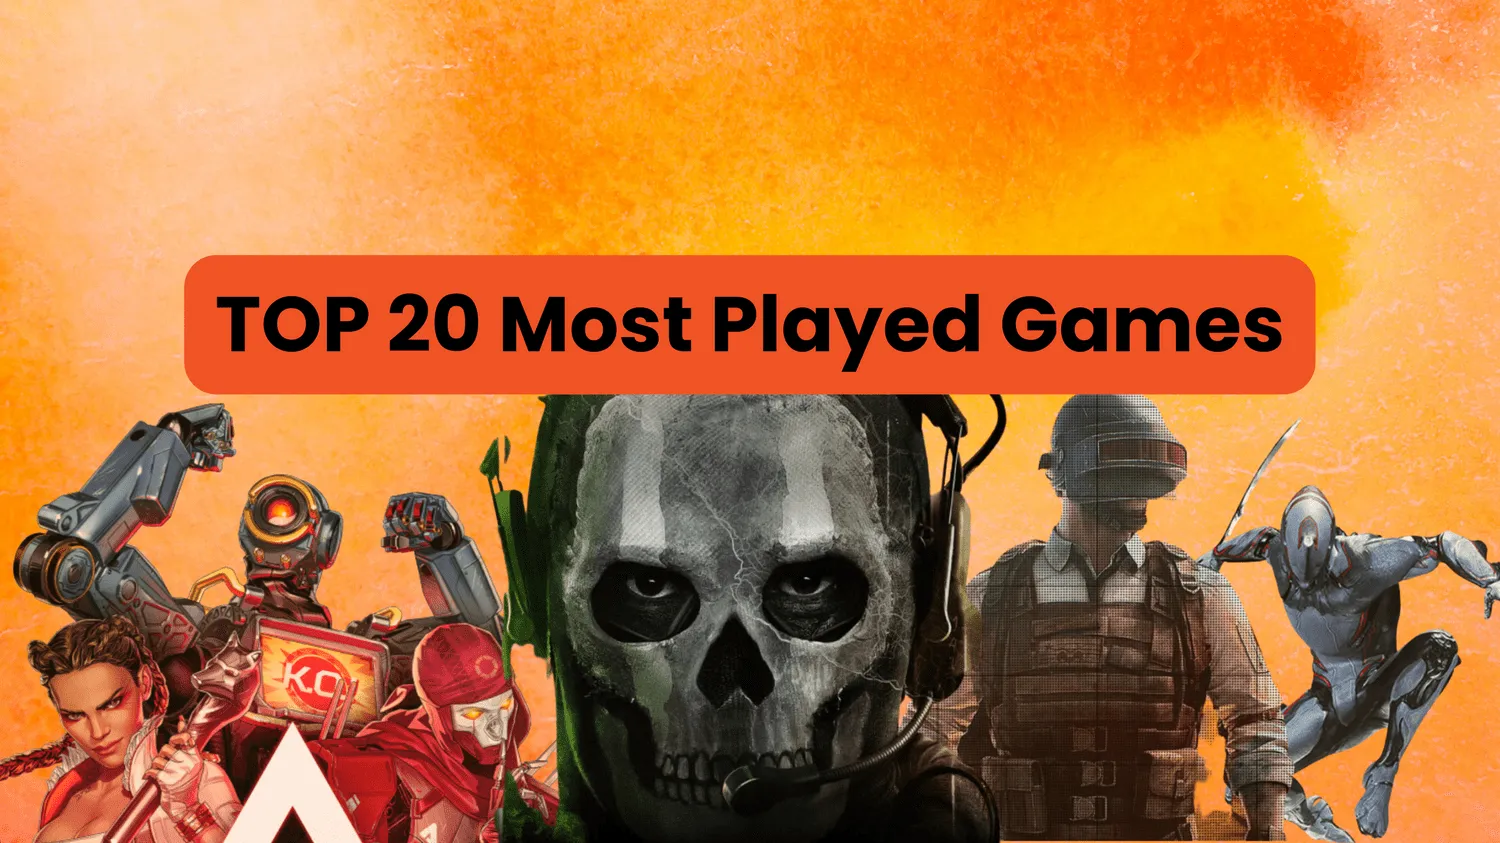 Top 20 Most Played Games image